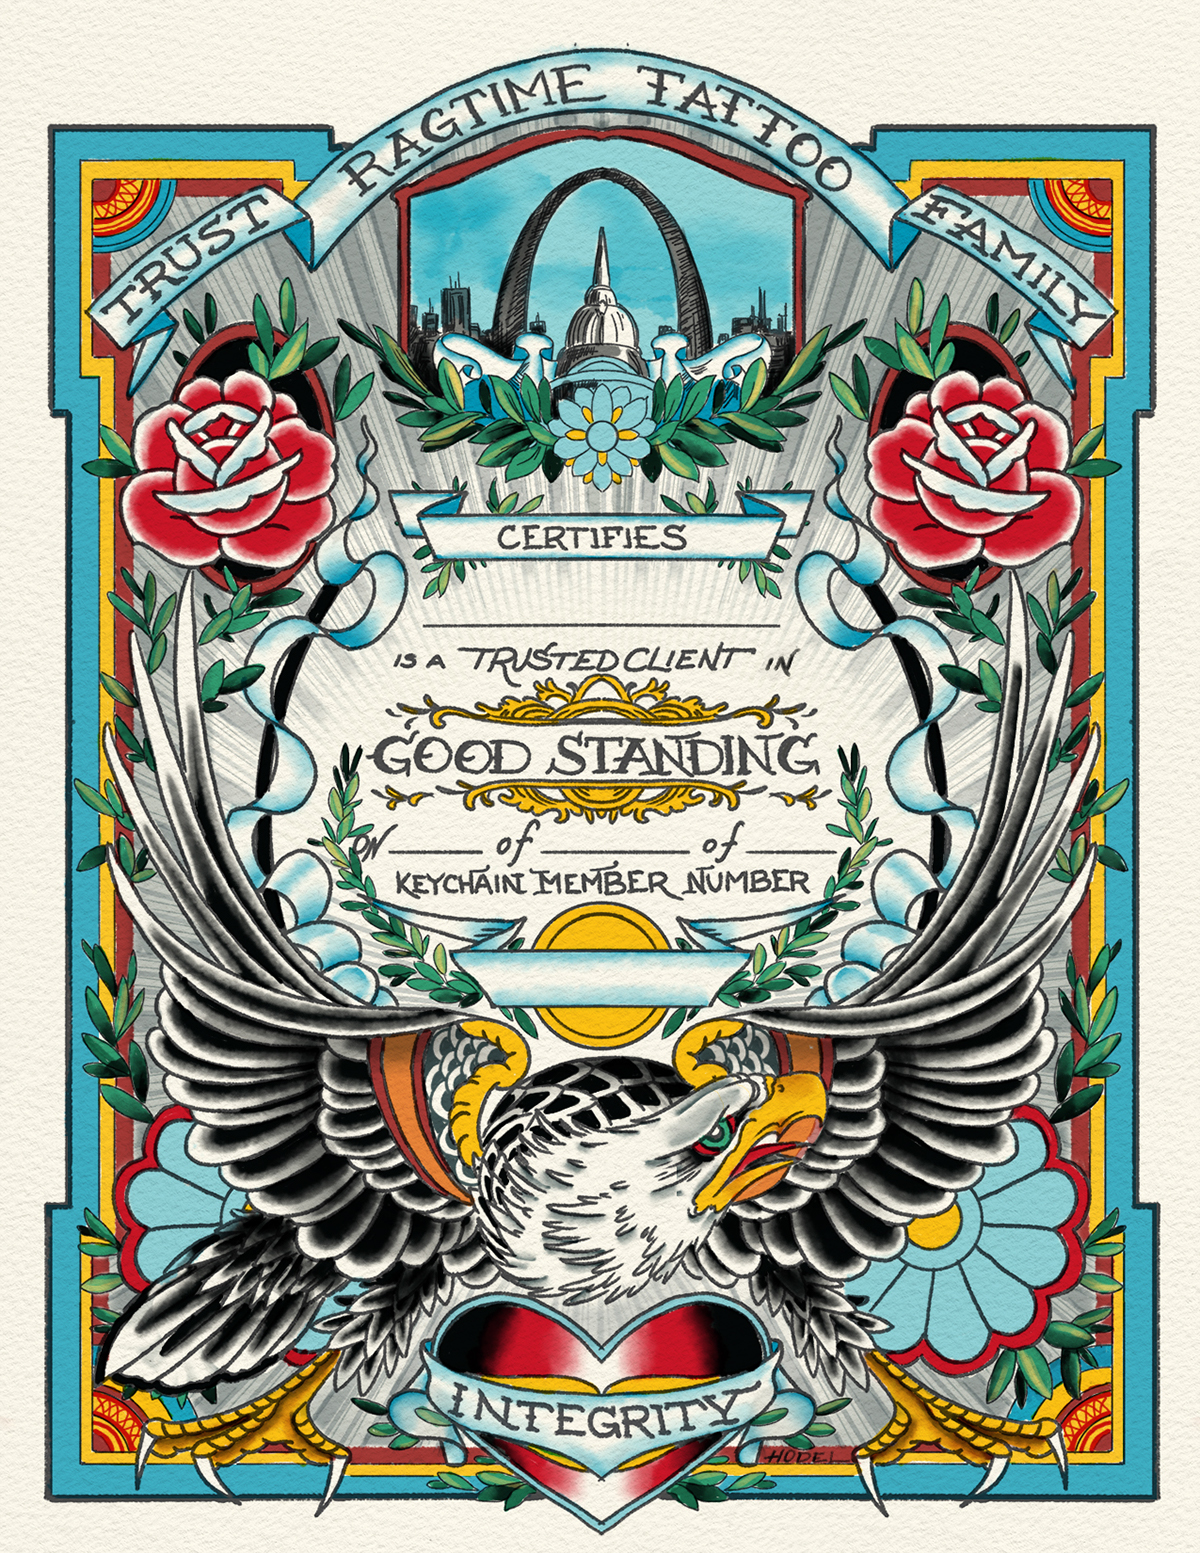 ragtime-tattoo-certificate-on-behance